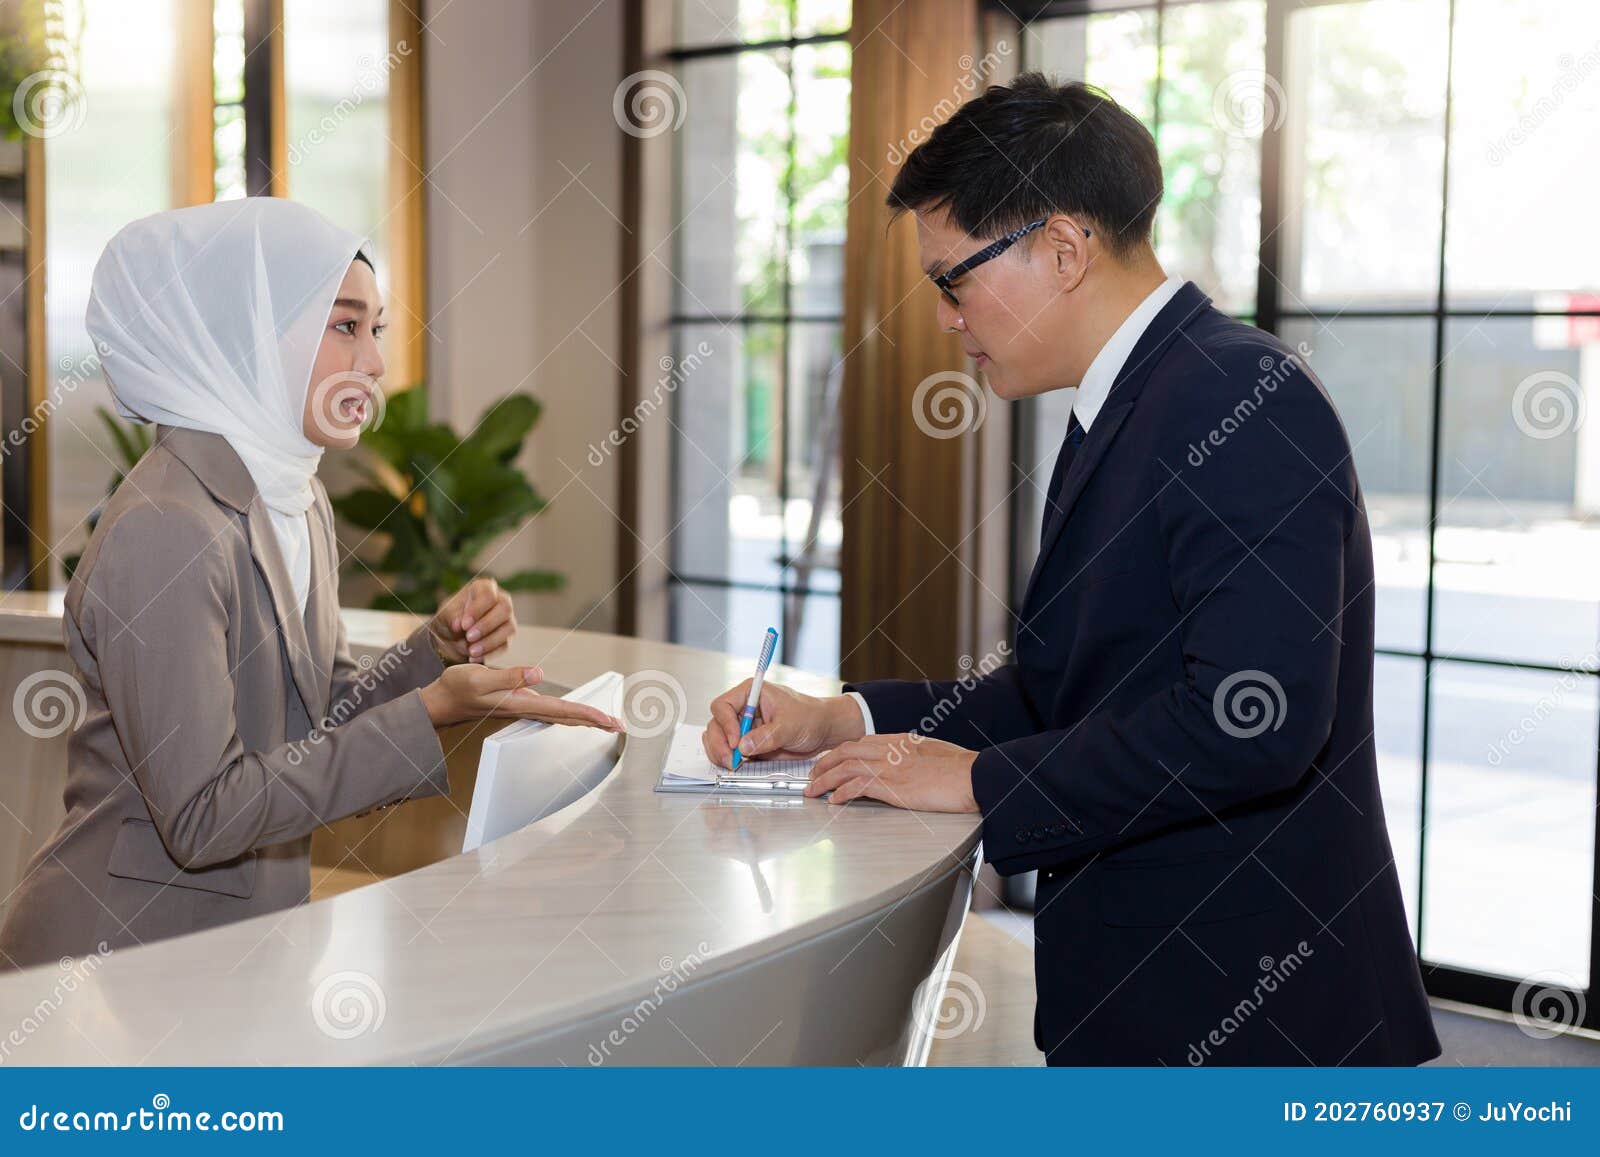 young female muslim receptionists are introducing hotel stays to travelers